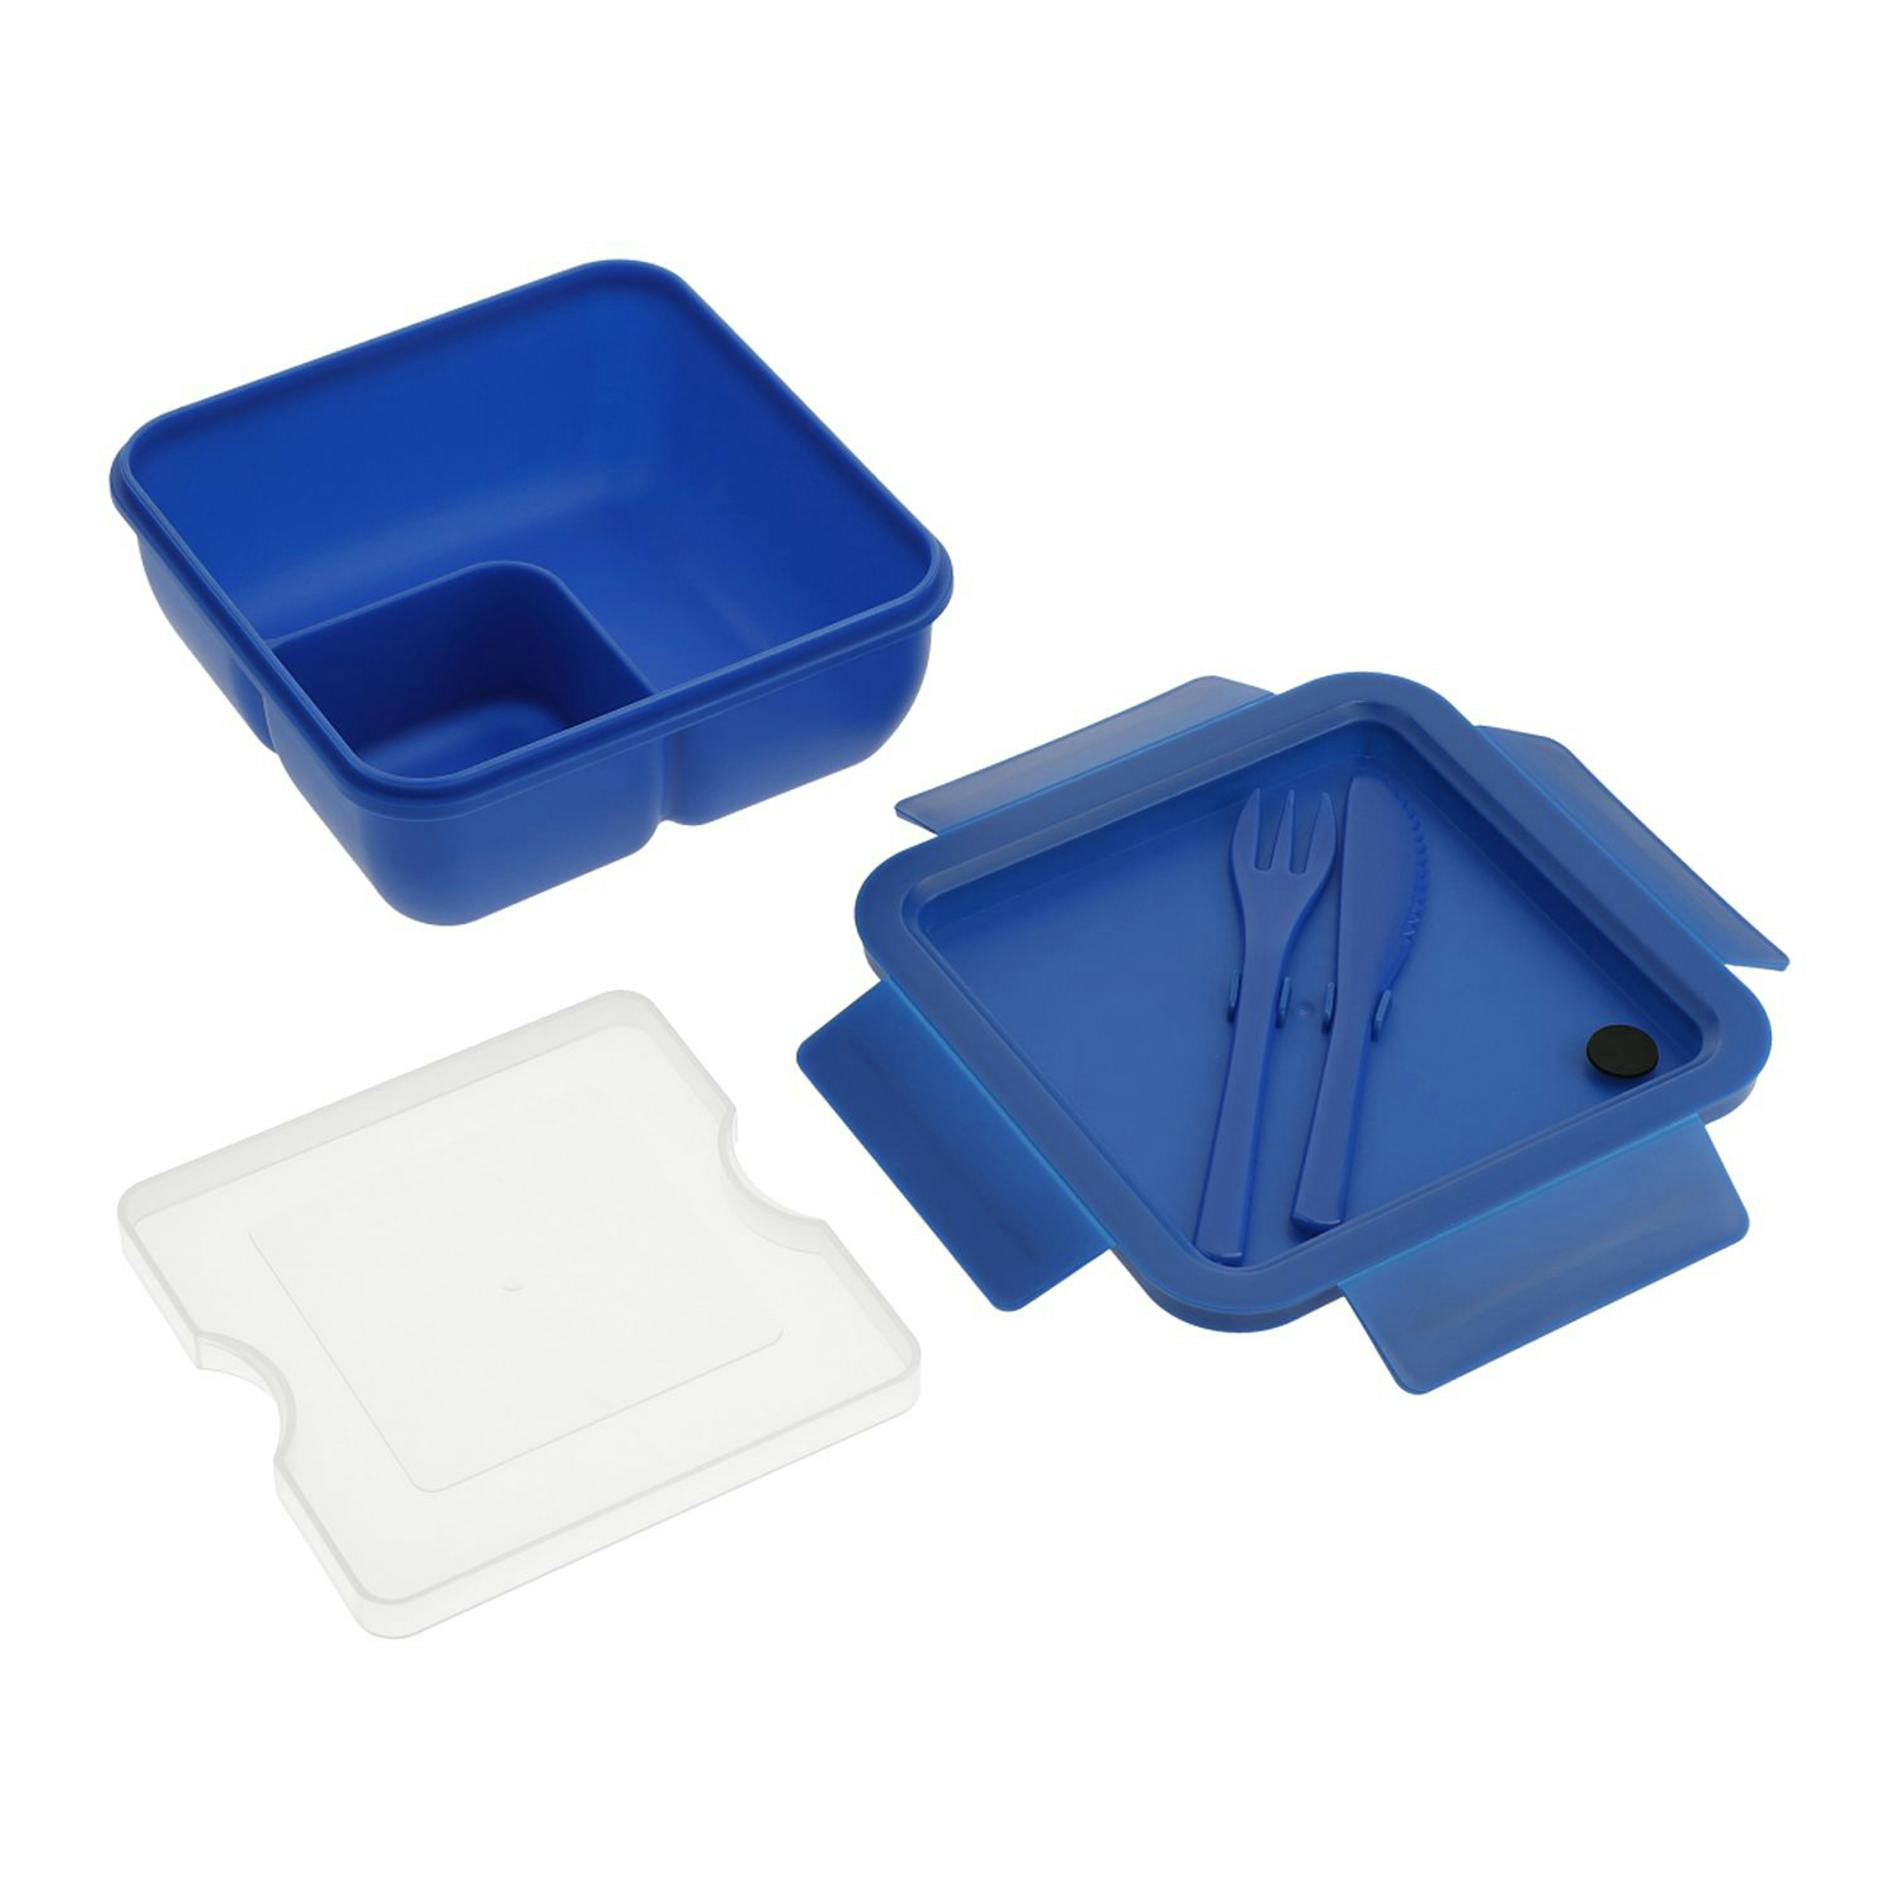 Recycled Plastic Lunch To Go Set - additional Image 2